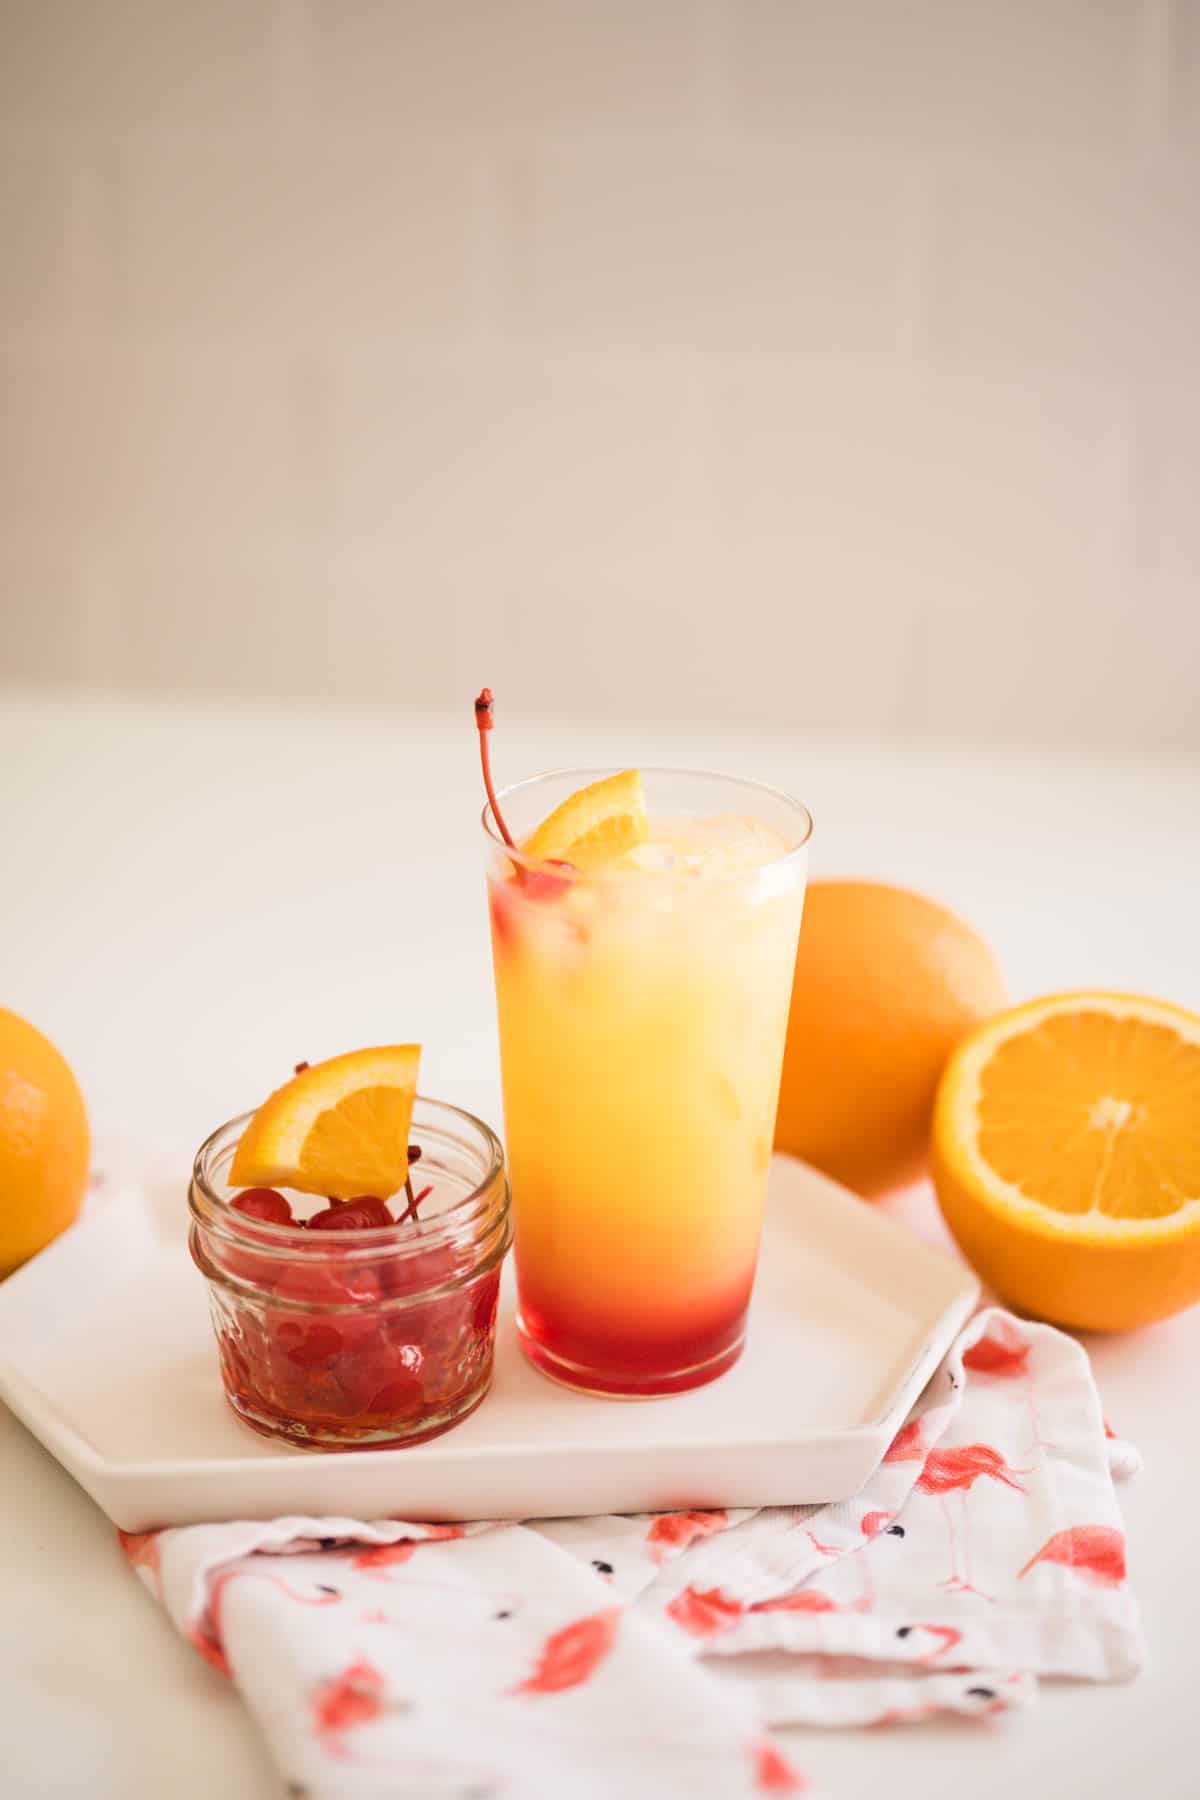 A Tequila Sunrise cocktail on a table next to some oranges and a small bowl of cherries.